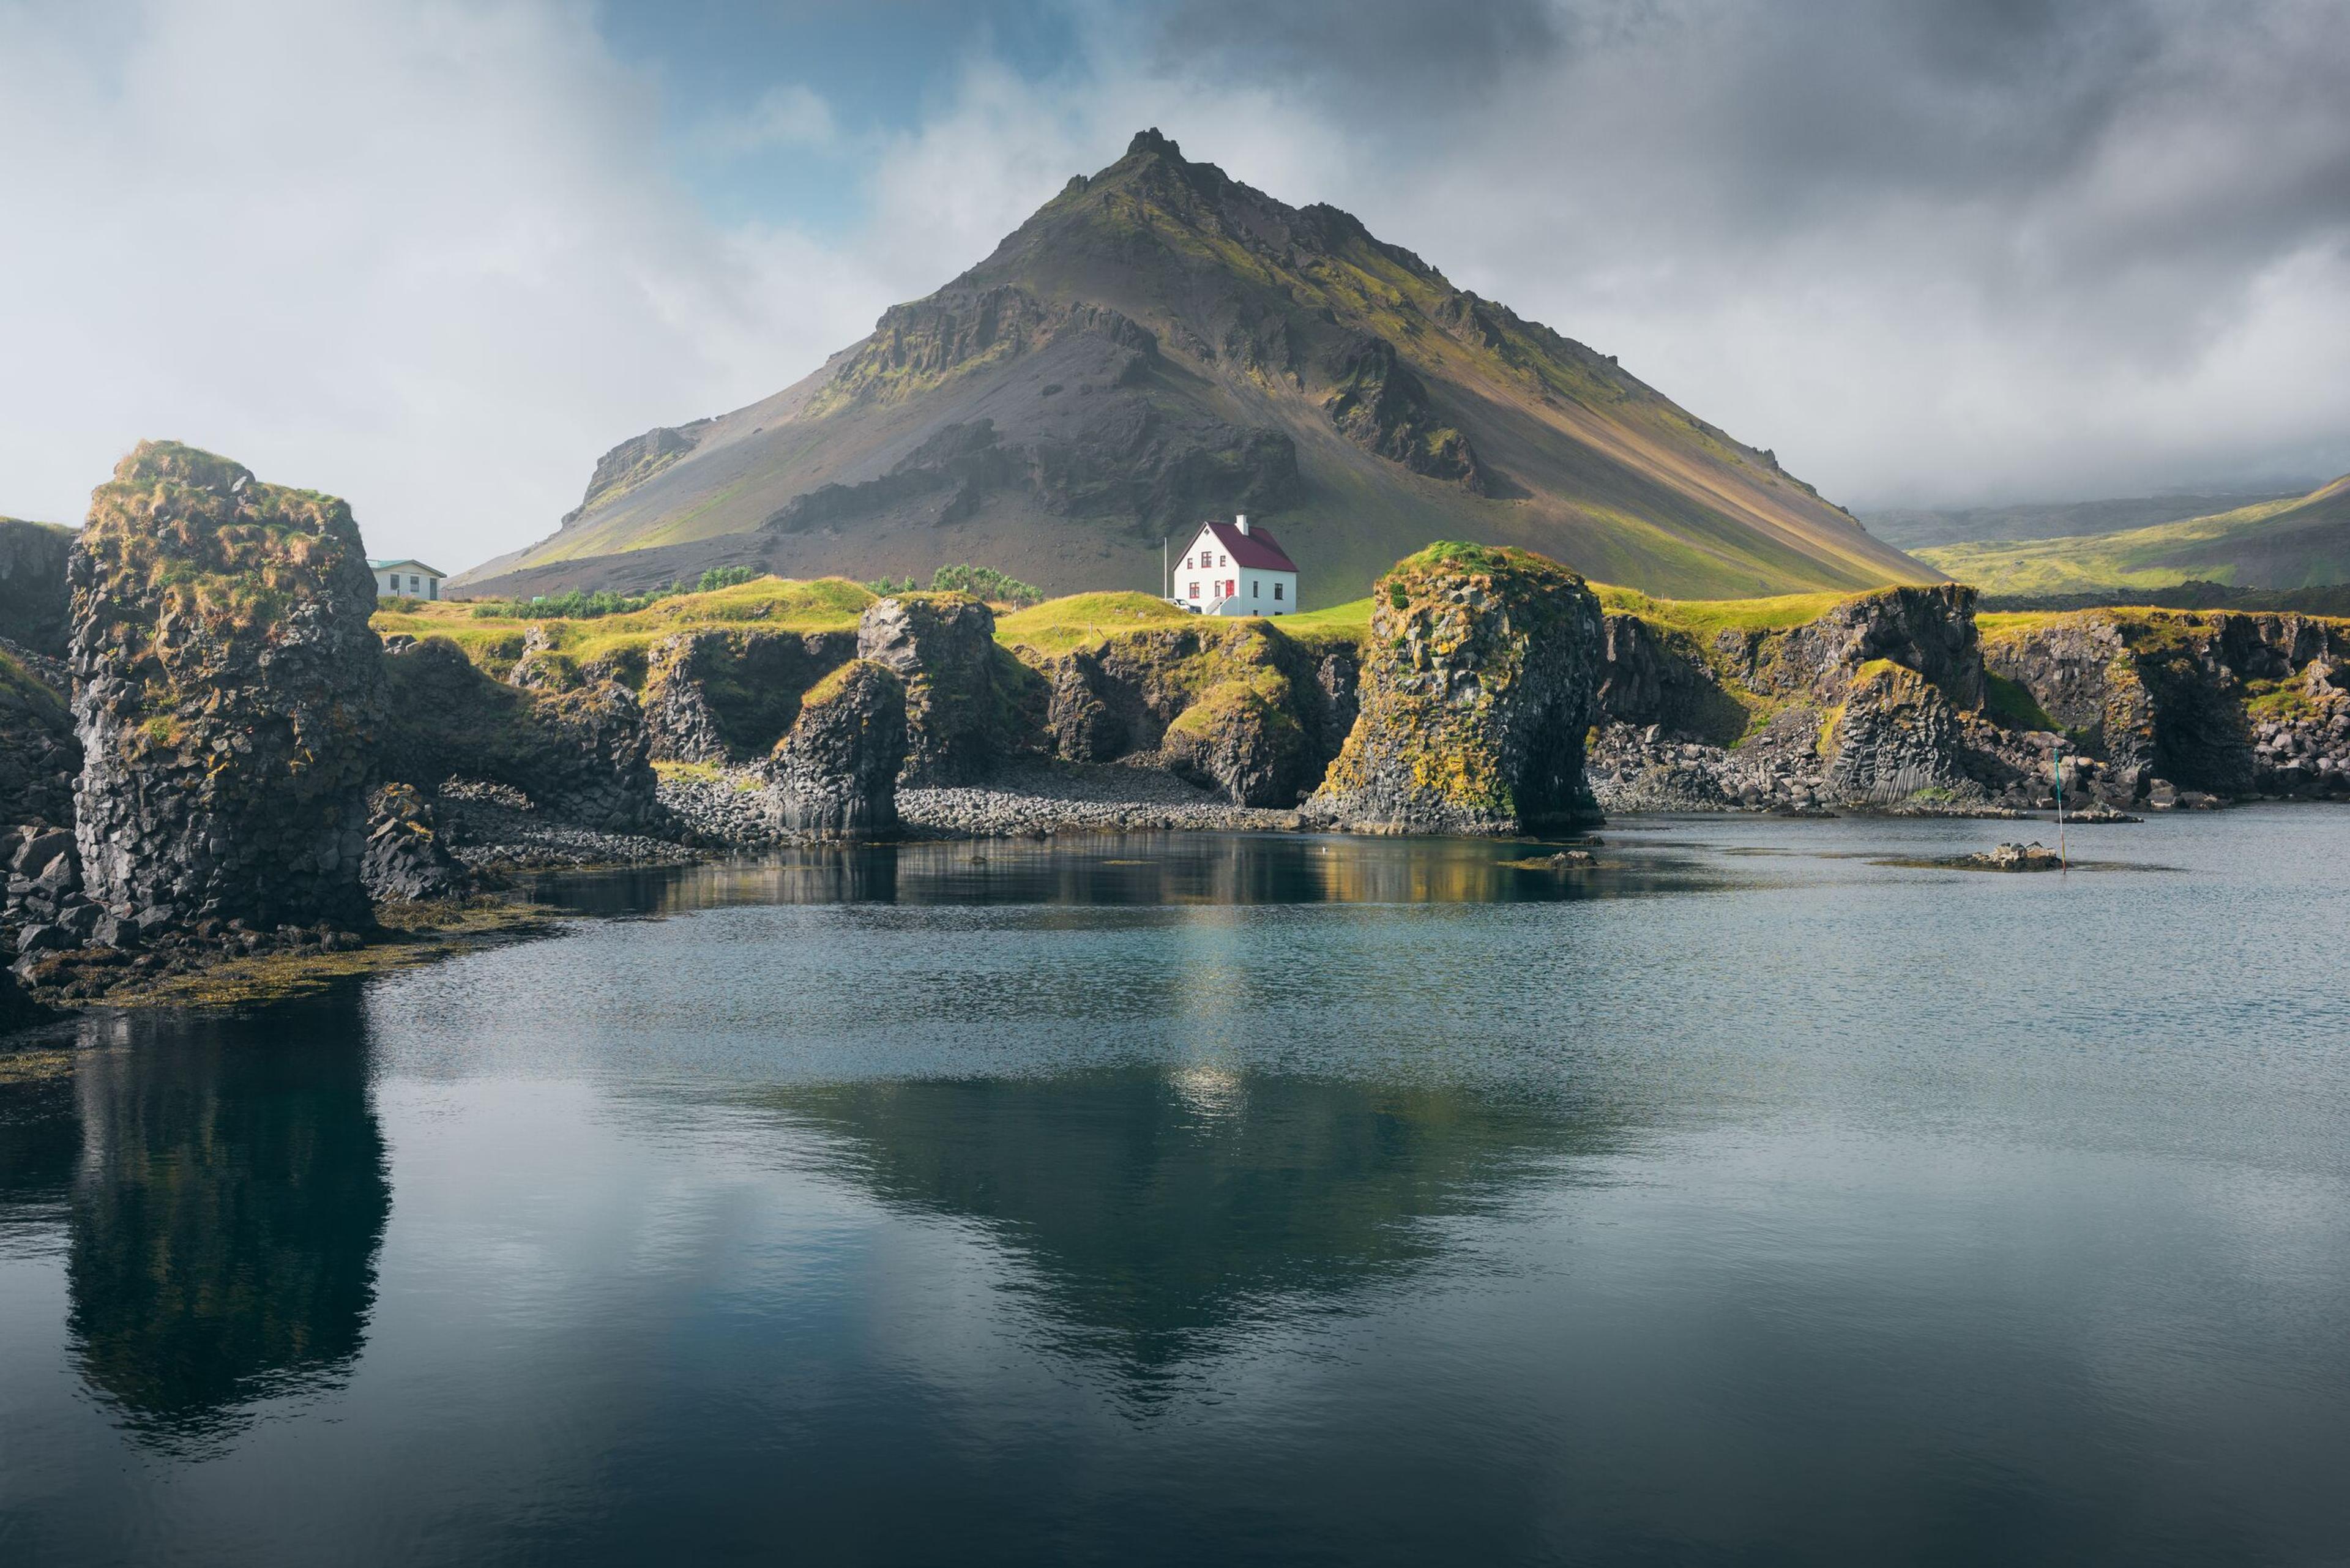 A serene lake reflects jagged cliffs and a solitary white house with a red roof, nestled against a majestic mountain backdrop under a partially cloudy sky.